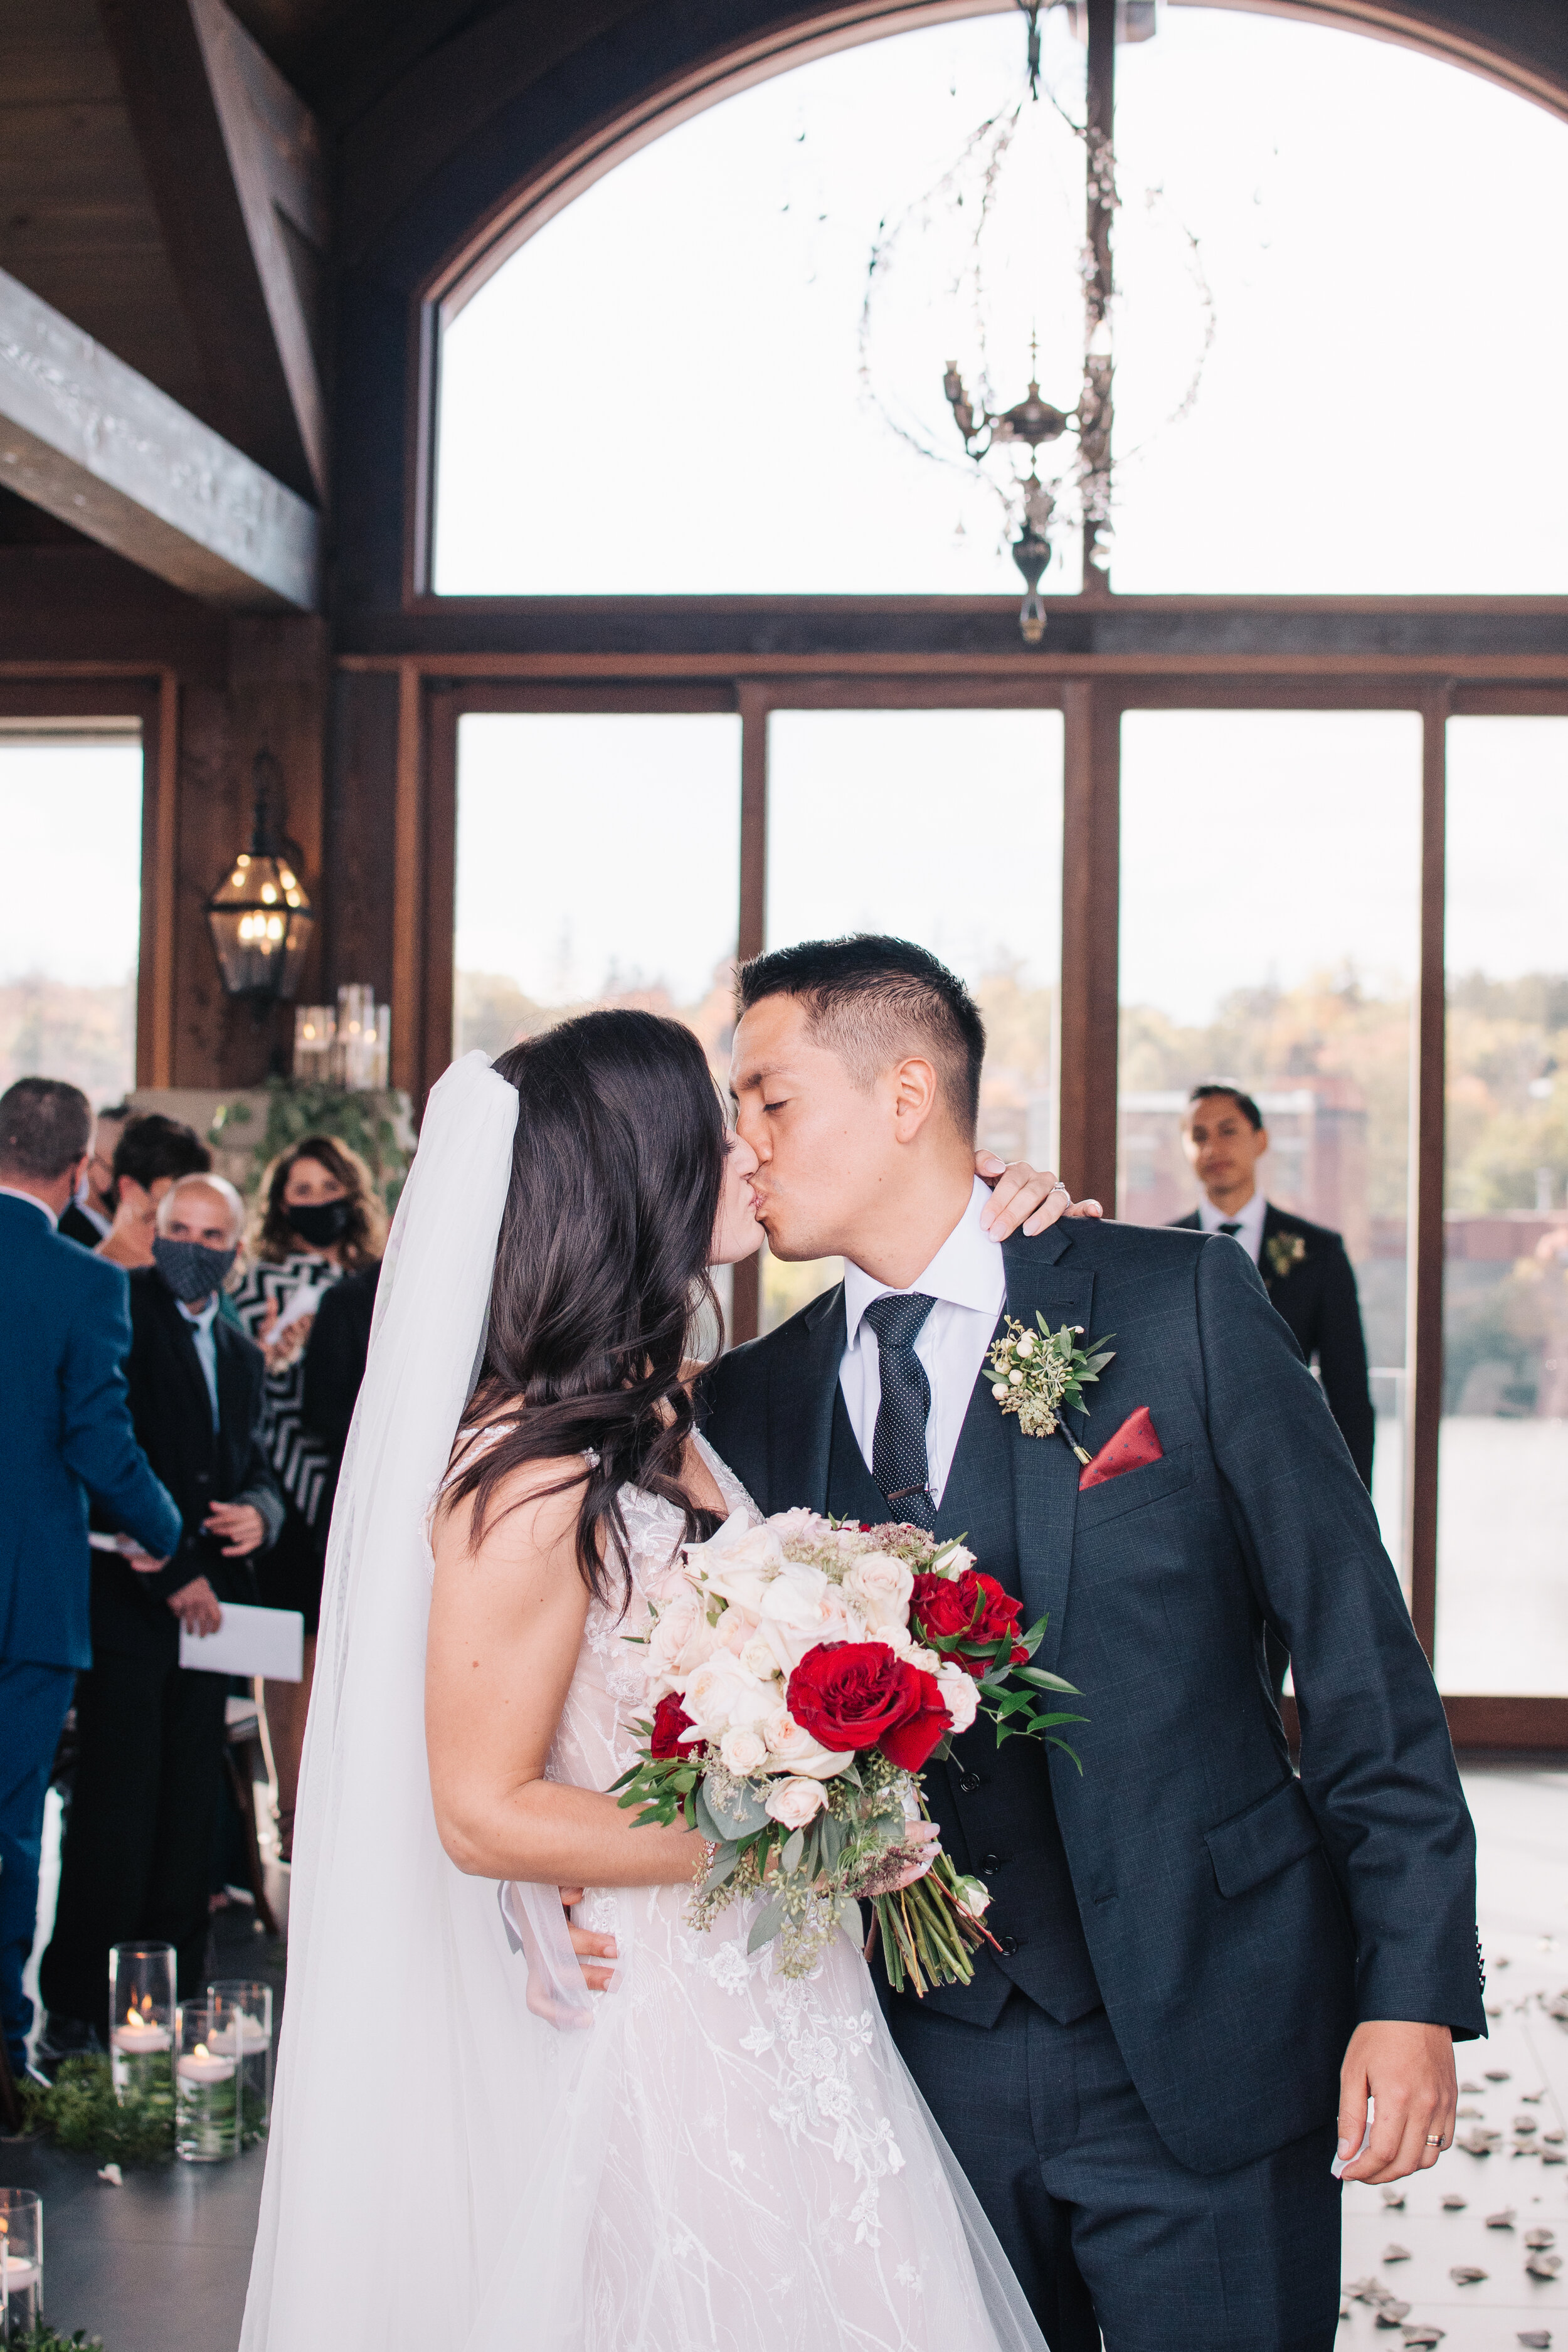 Bride and groom's first kiss as husband and wife photographed by Toronto wedding photographers, Ugo Photography